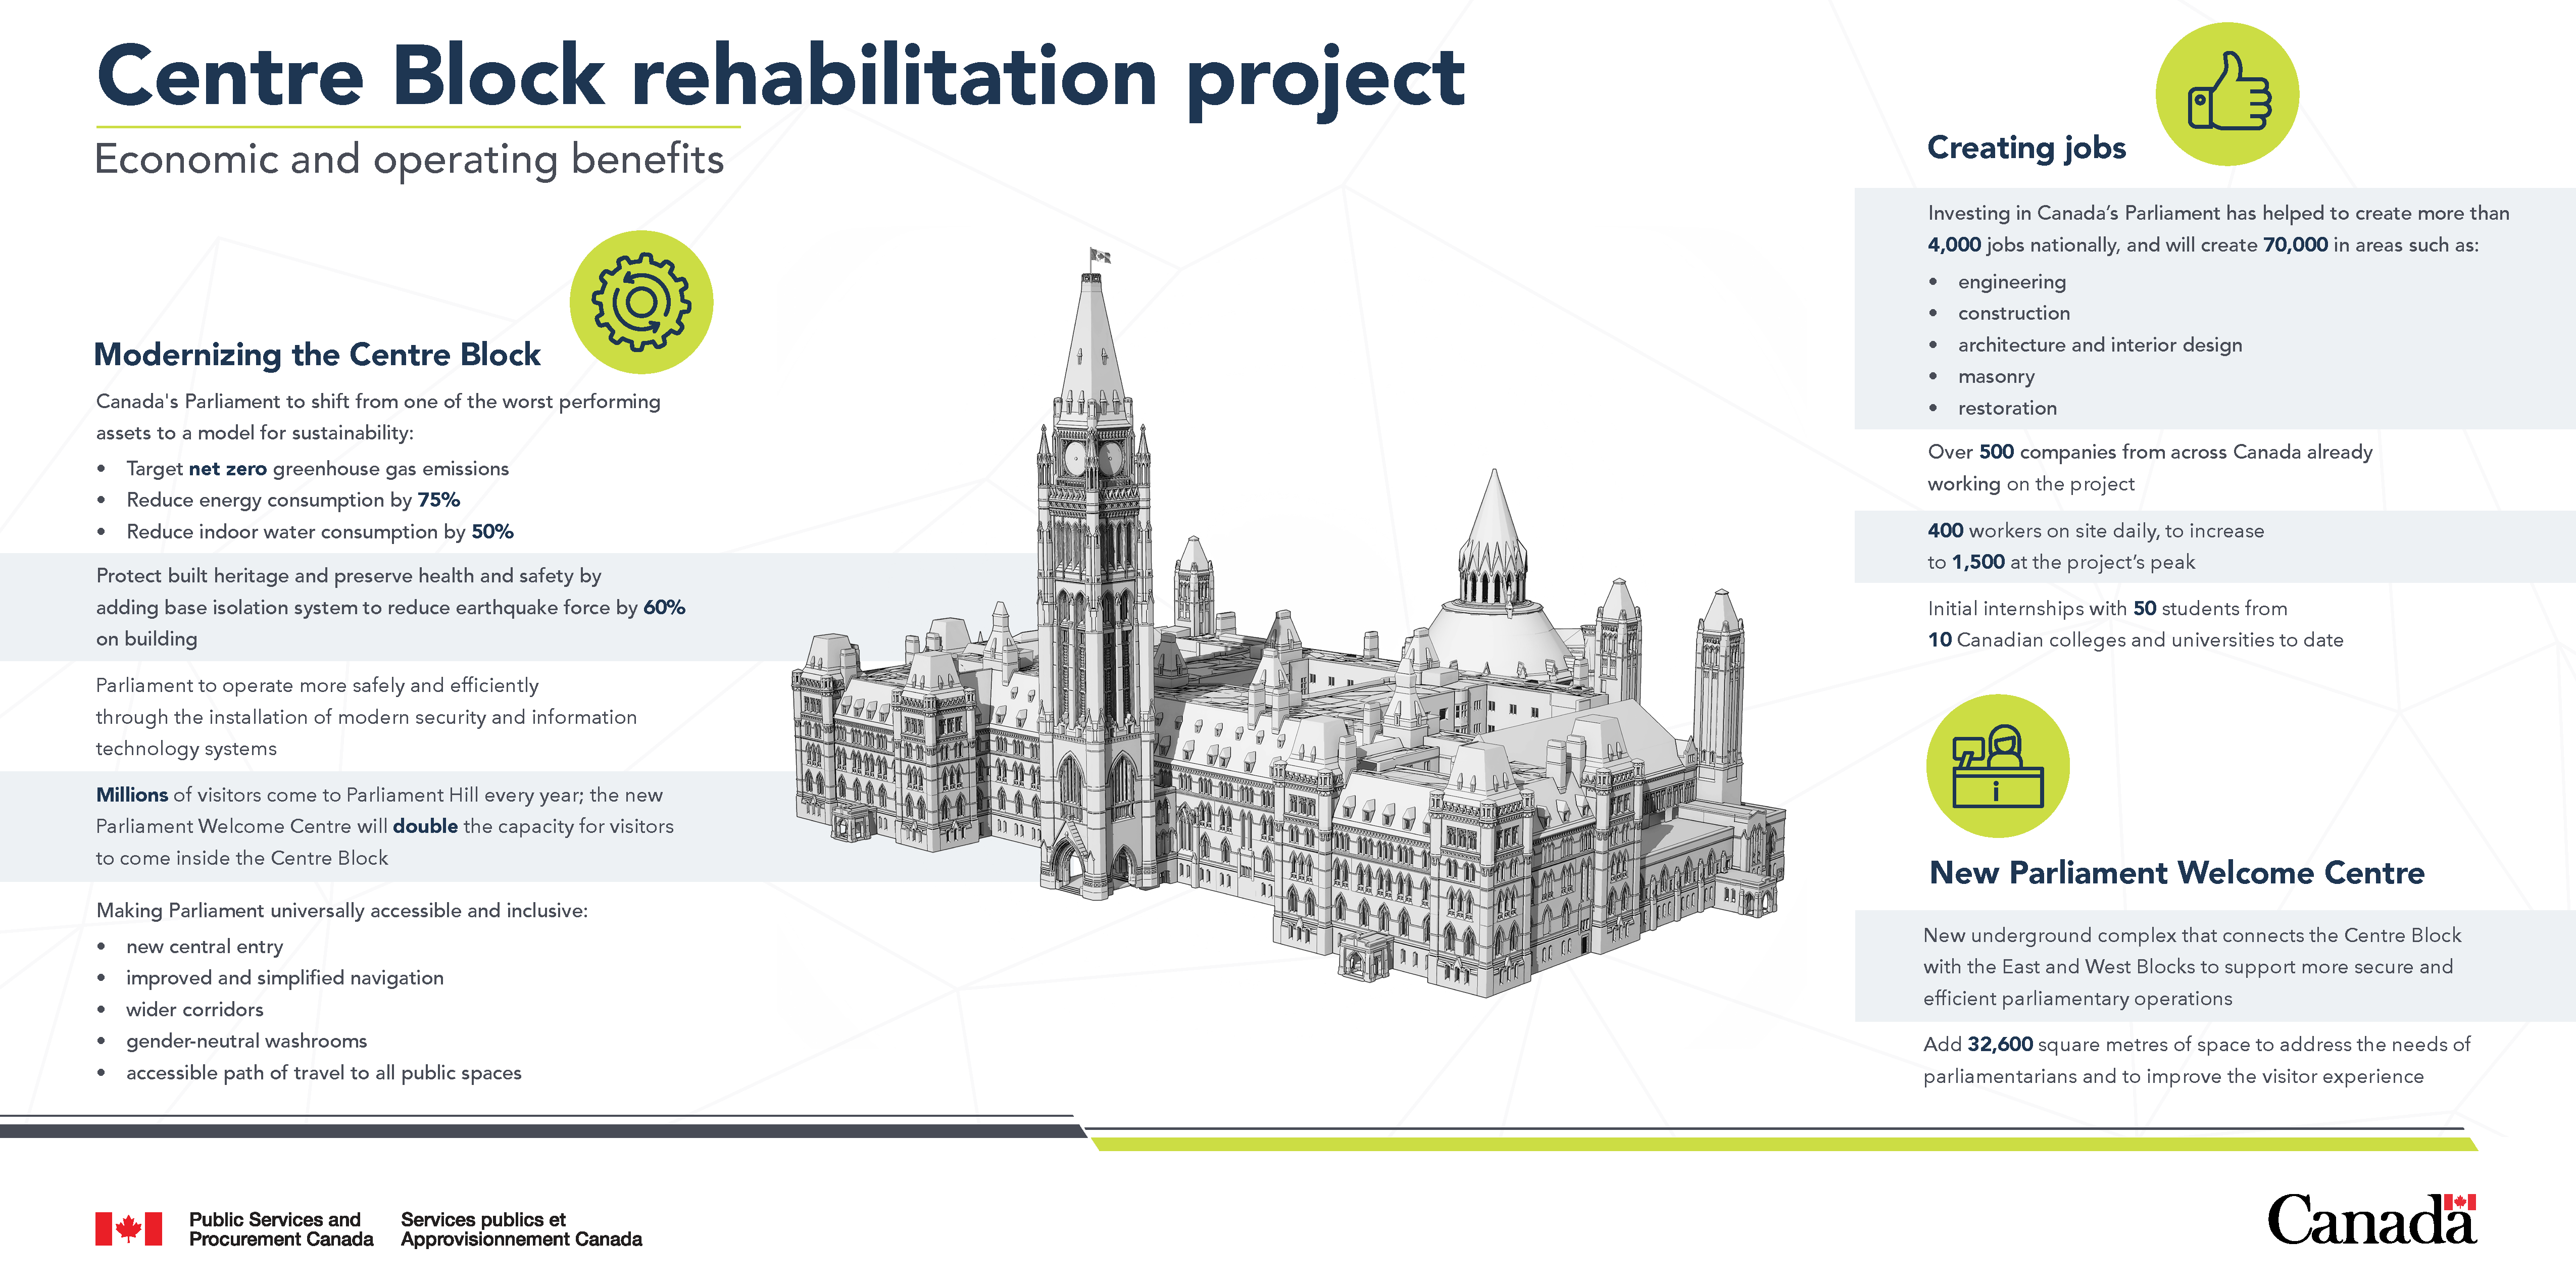 An infographic listing the various economic and operating benefits part of the Centre Block rehabilitation project. See long description below for details.